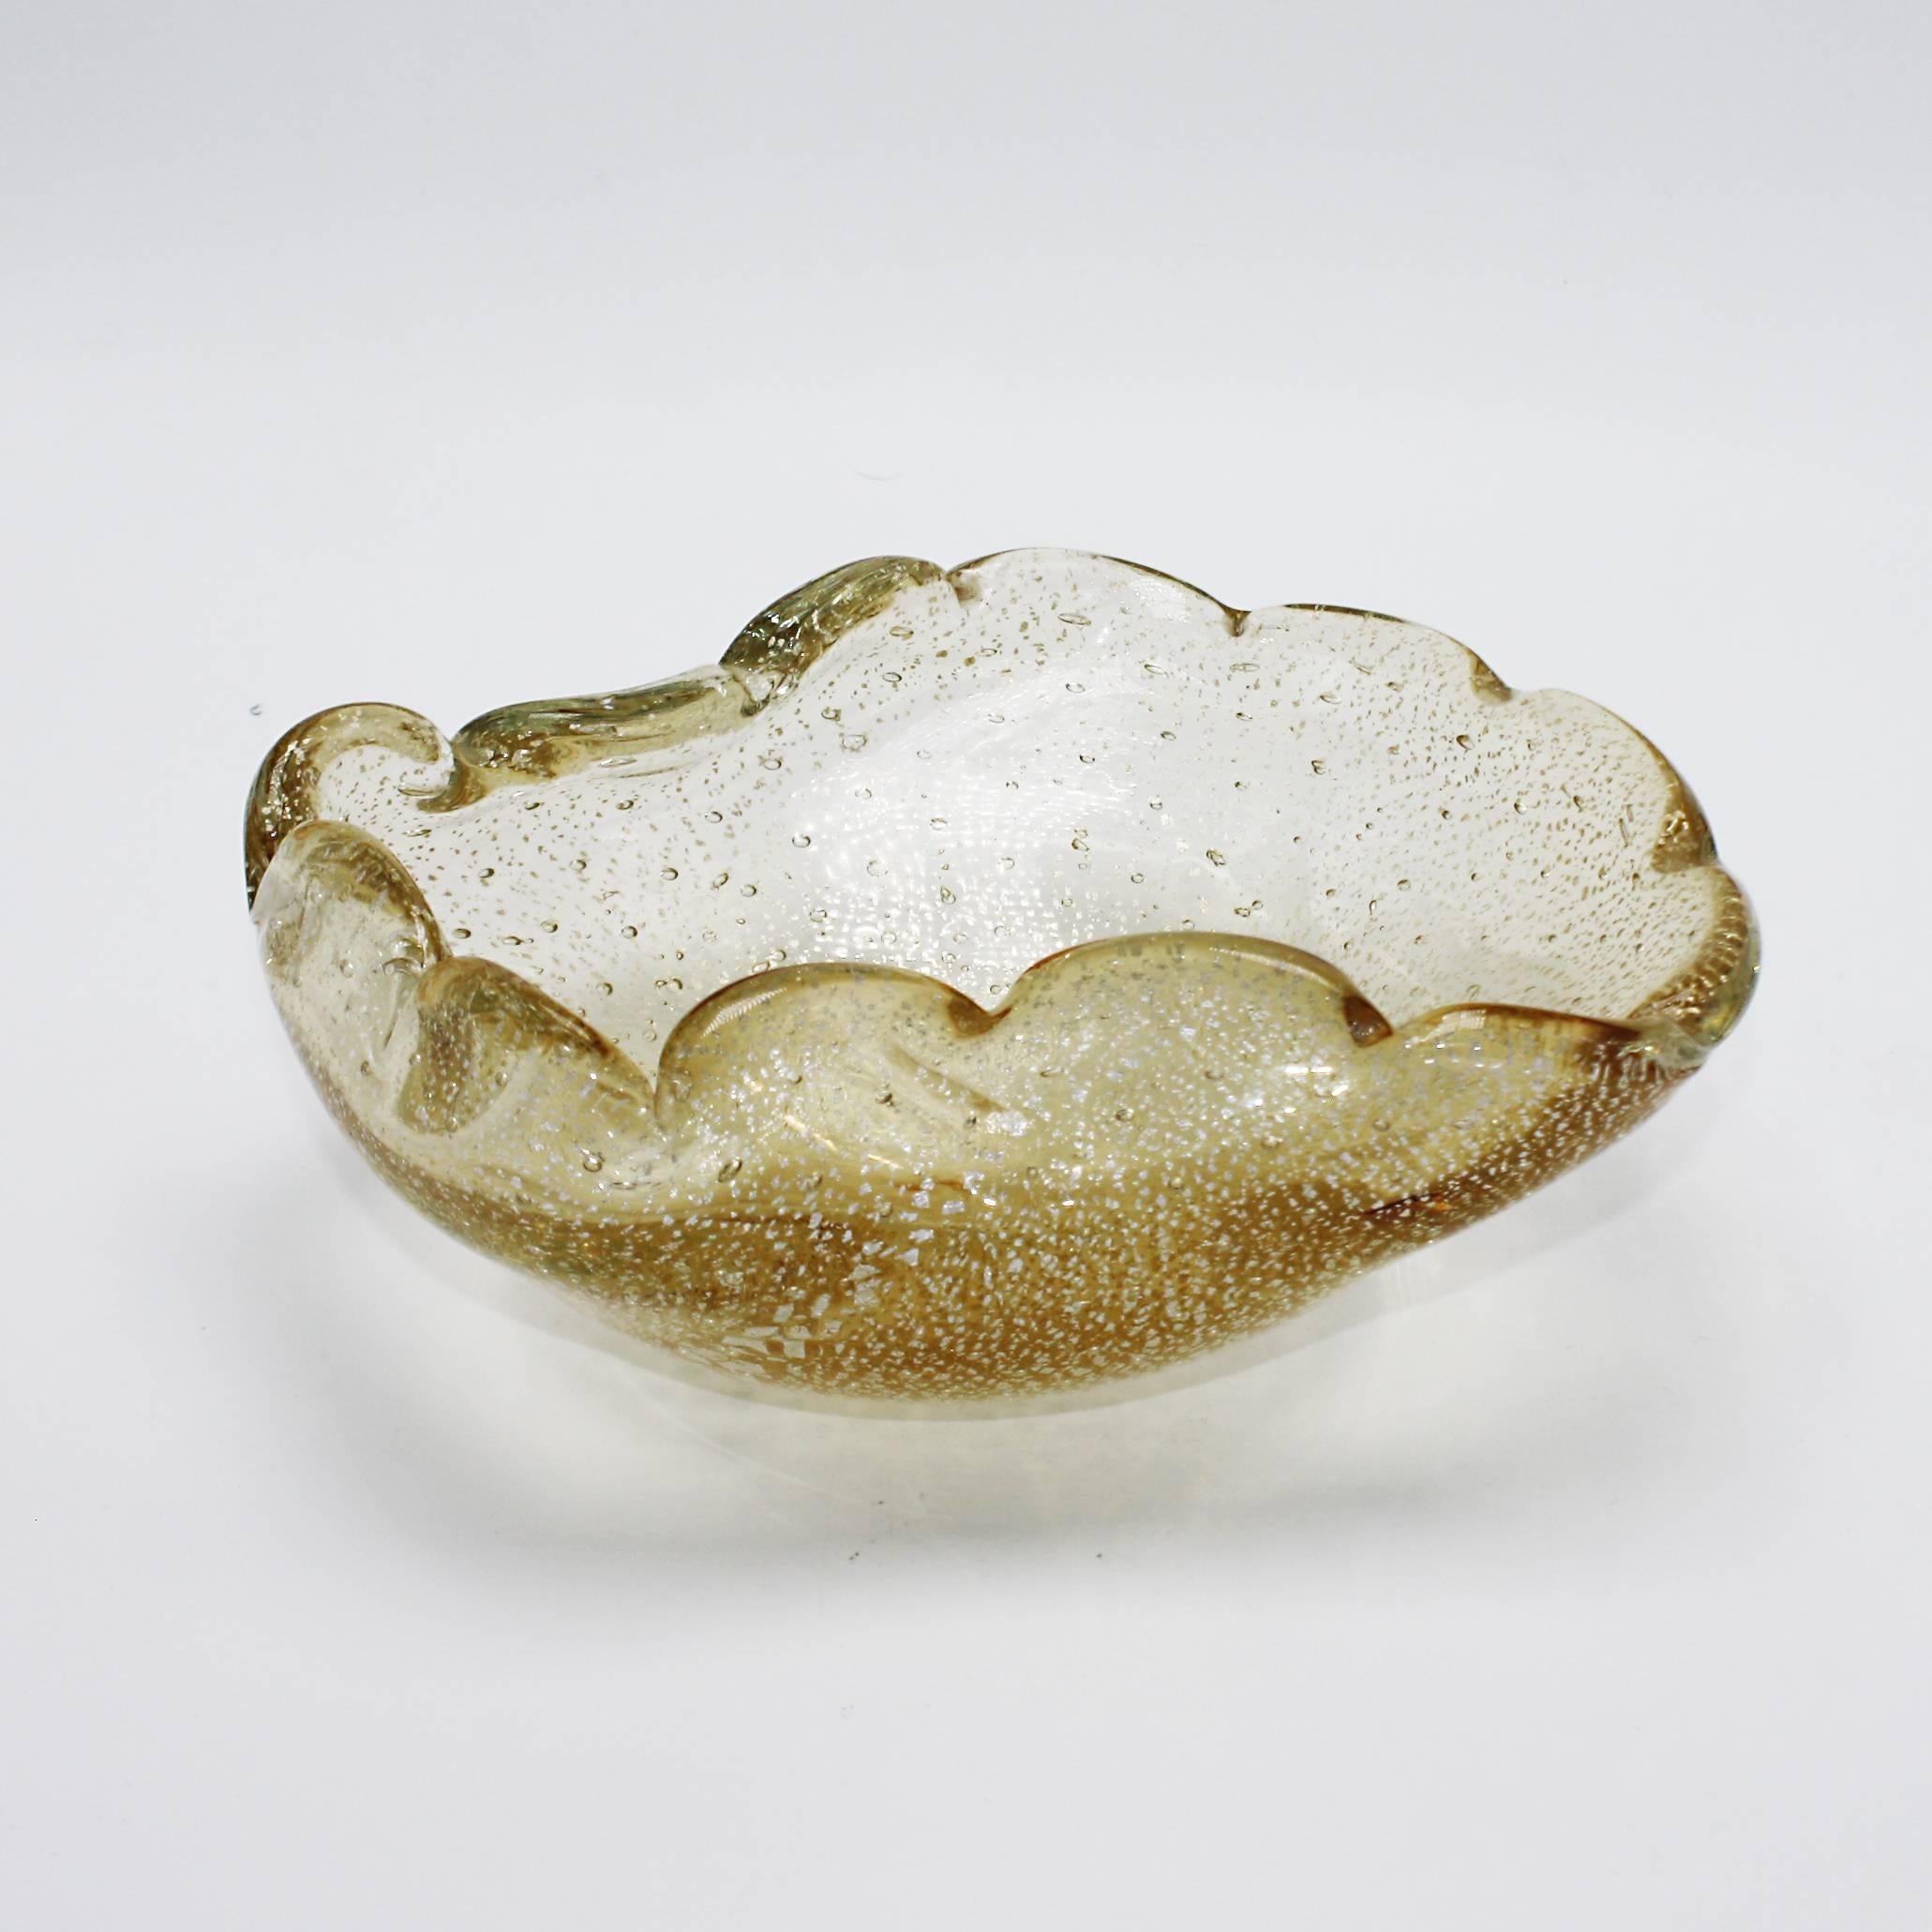 Gold Murano glass bowl with clear bubble inclusions and gold flecks, circa 1960.
   